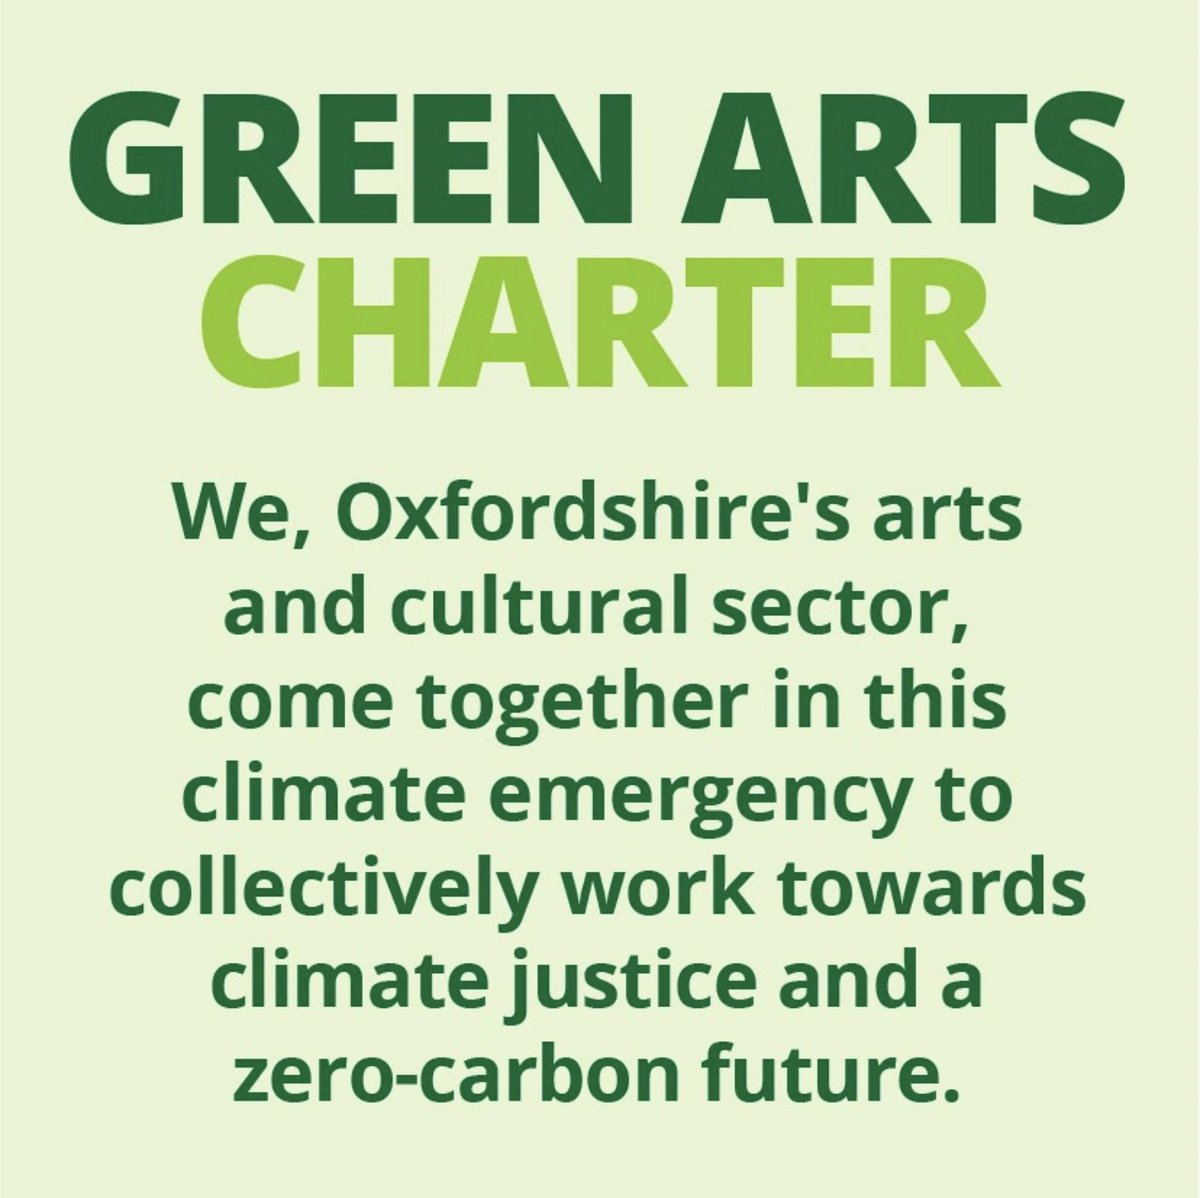 OVADA is happy and proud to be aligned with @greenartsox as one of the organisations and artists in Oxfordshire to work collectively towards climate justice and a zero-carbon future 🌍⠀
#GreenArtsCharter #ClimateAction #Oxfordshire #COP26